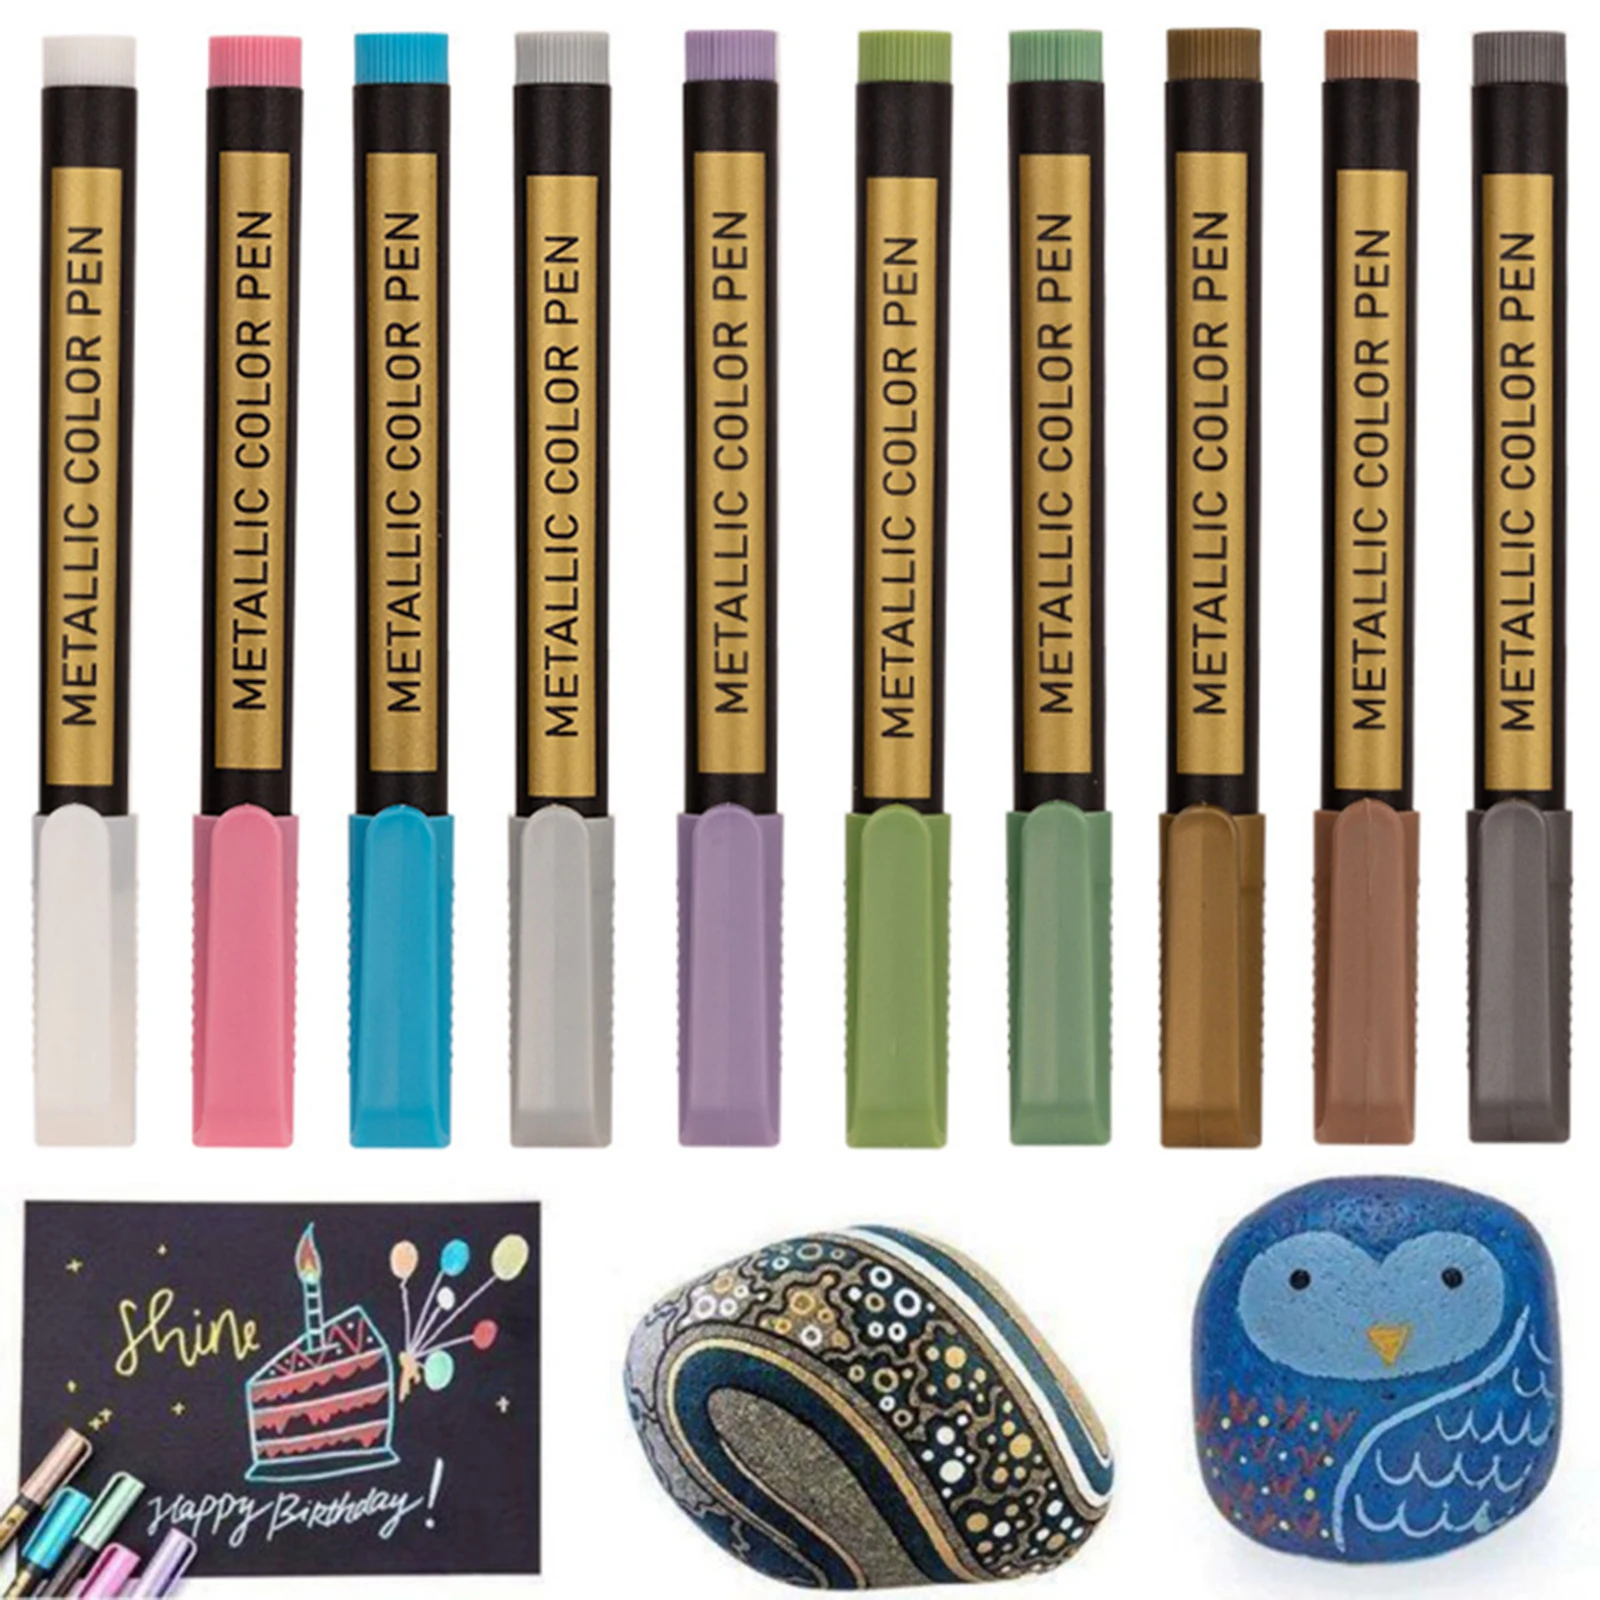 10lic Pens for Craft Art Markers for Wedding Guest Book,